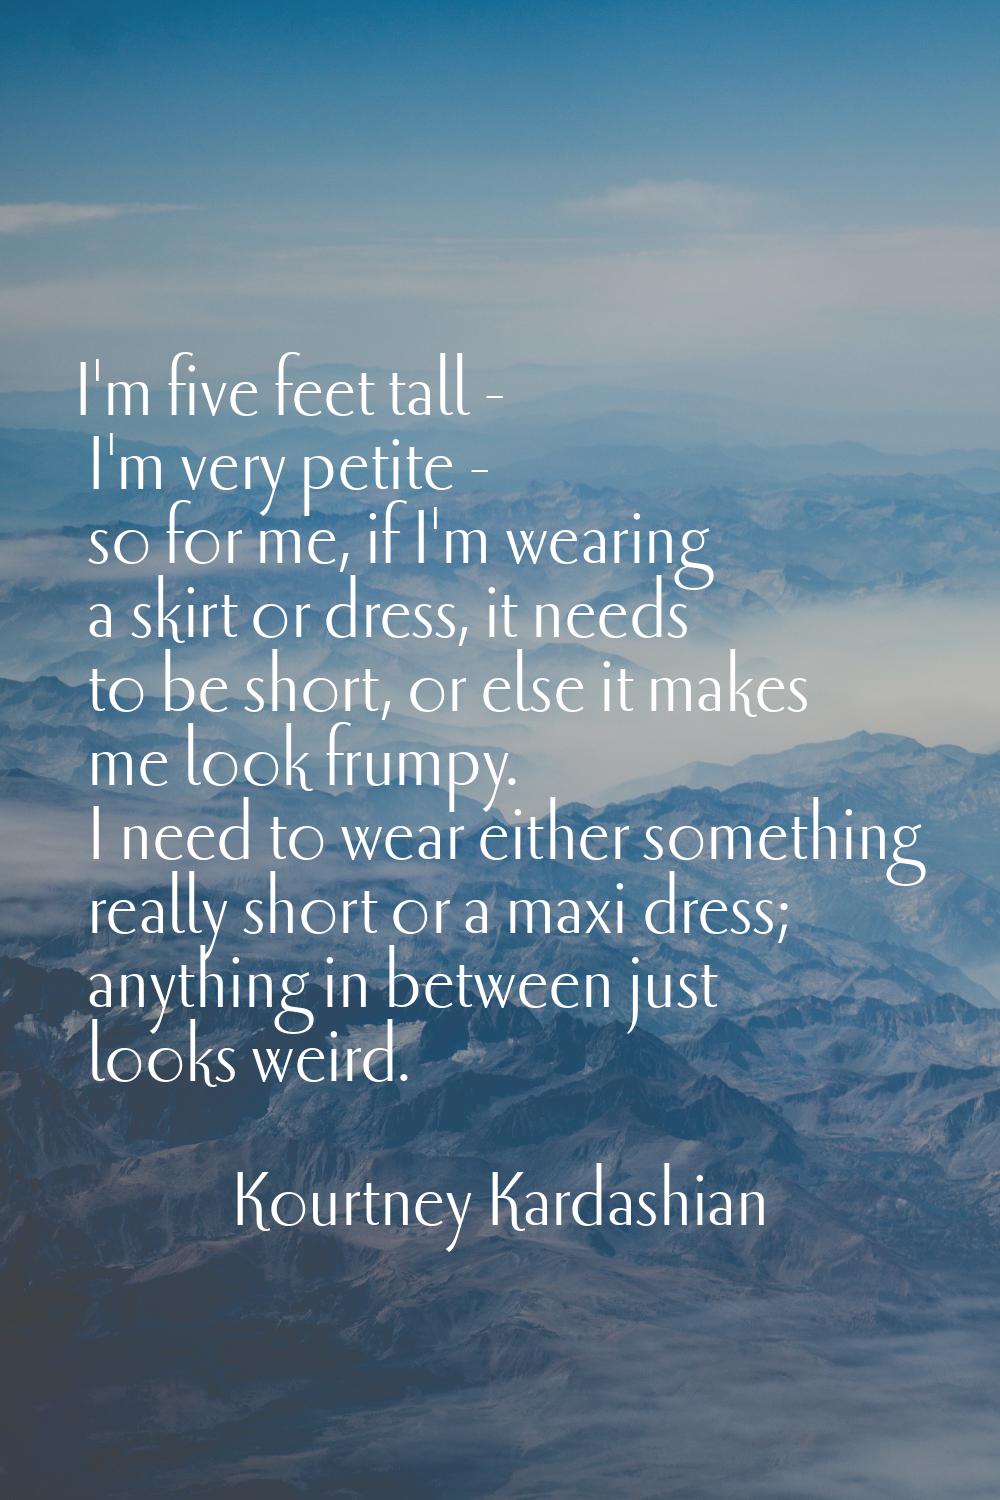 I'm five feet tall - I'm very petite - so for me, if I'm wearing a skirt or dress, it needs to be s